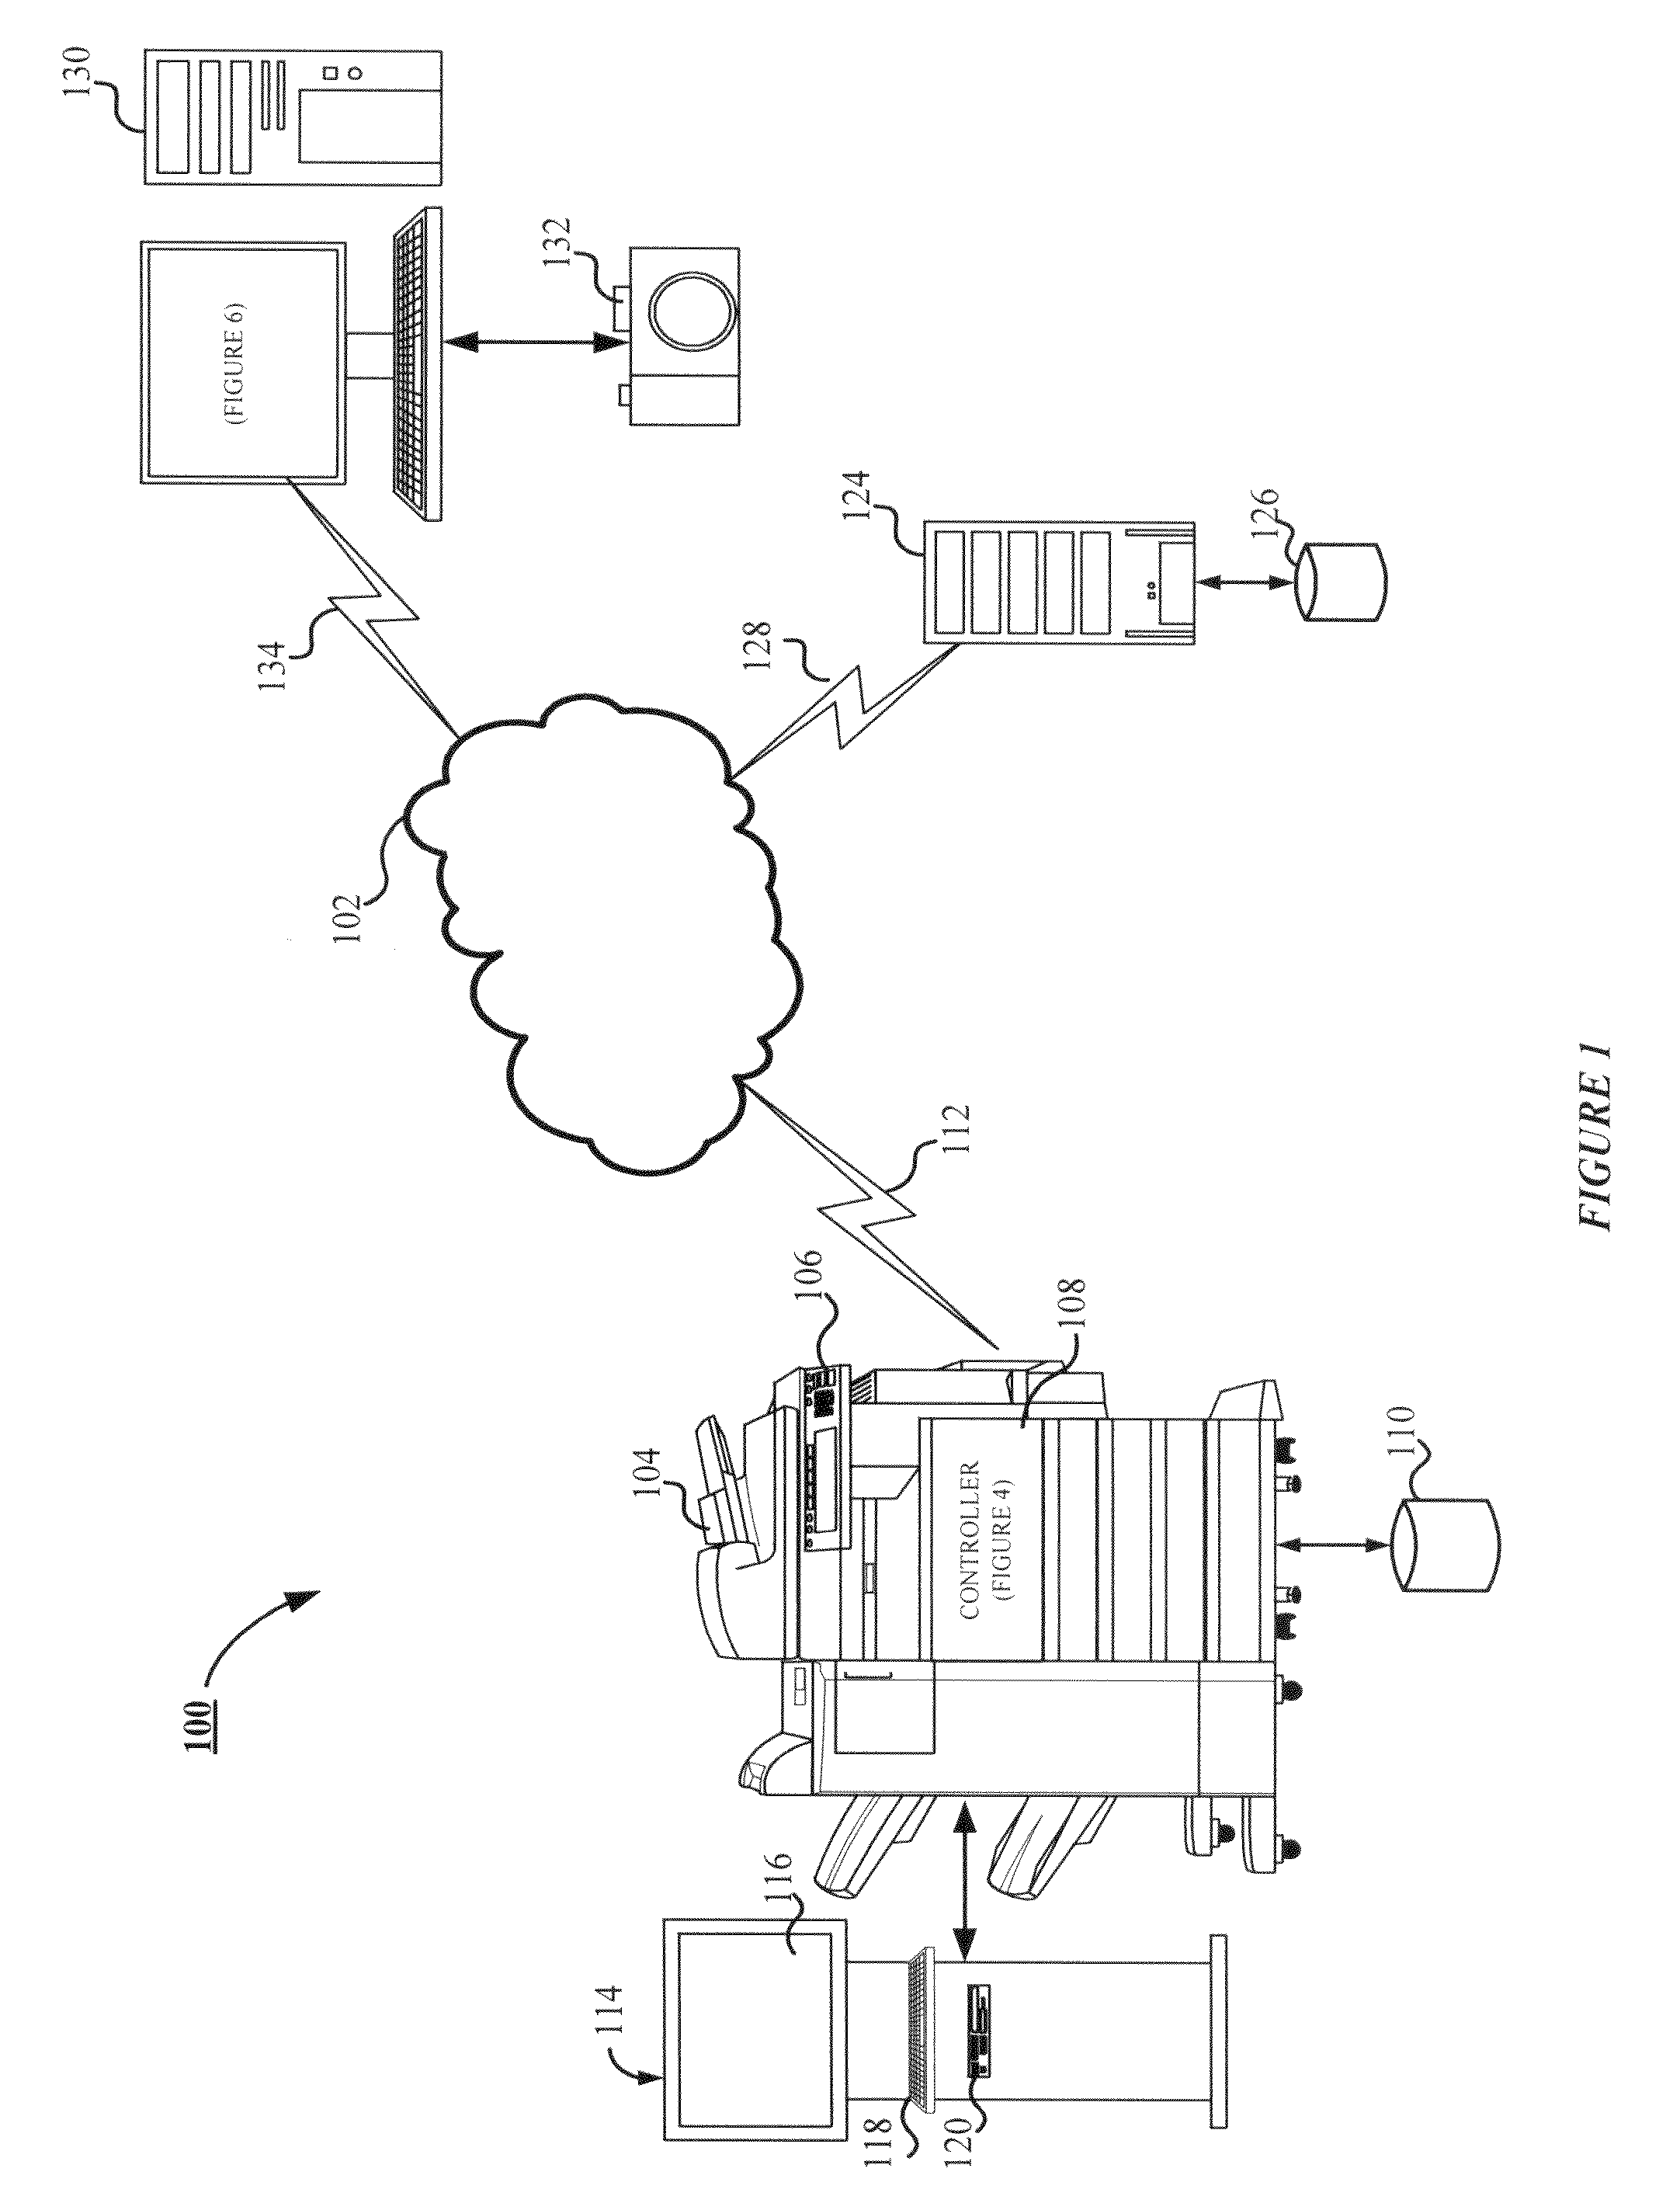 System and method for image facial area detection employing skin tones